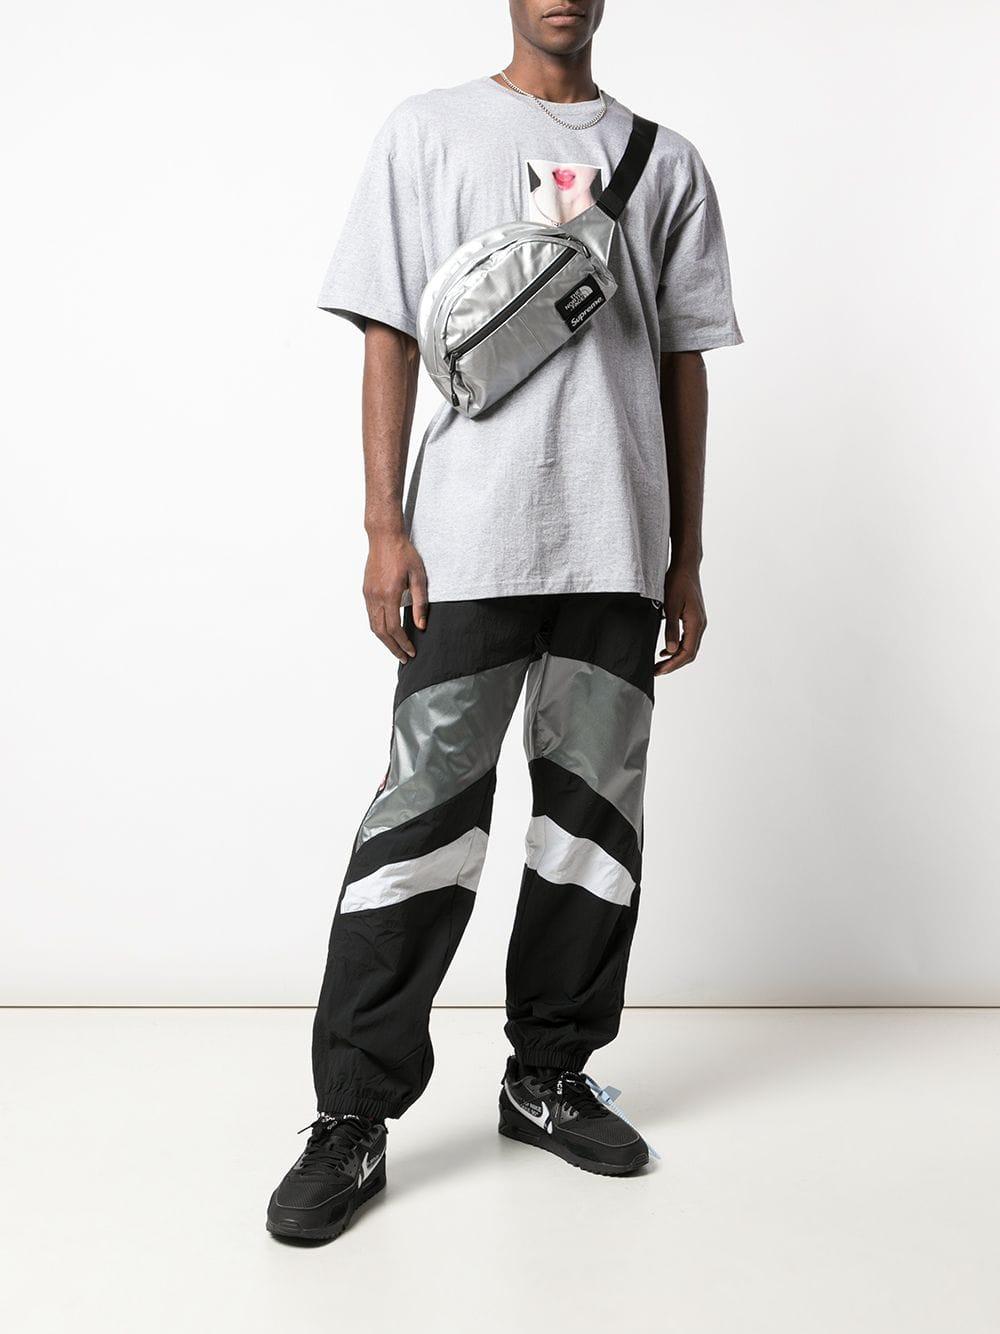 Supreme X The North Face Belt Bag in Silver (Metallic) for Men - Lyst